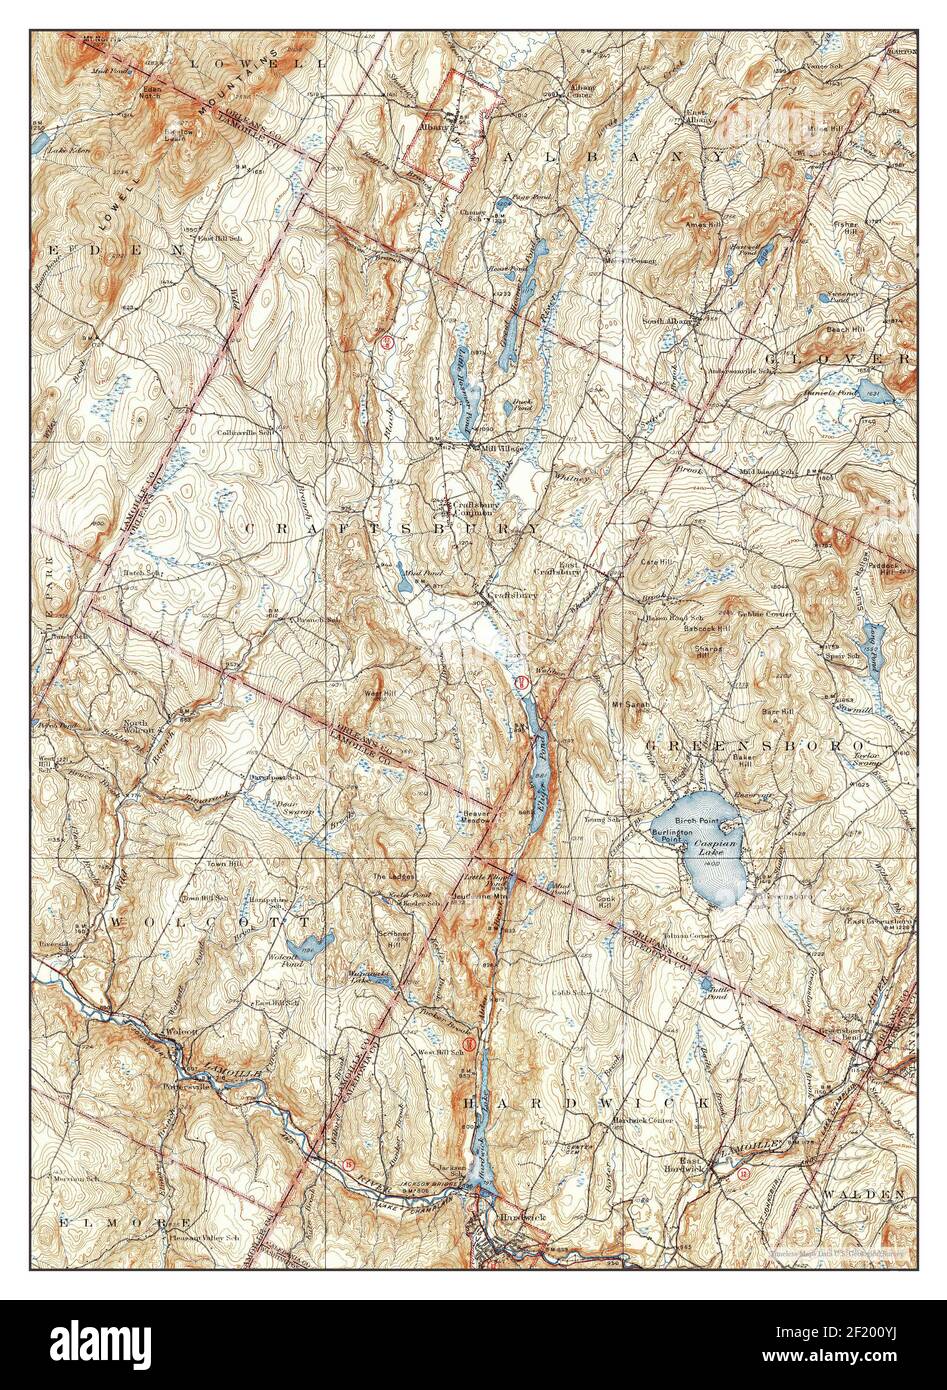 Hardwick, Vermont, map 1938, 1:62500, United States of America by Timeless Maps, data U.S. Geological Survey Stock Photo